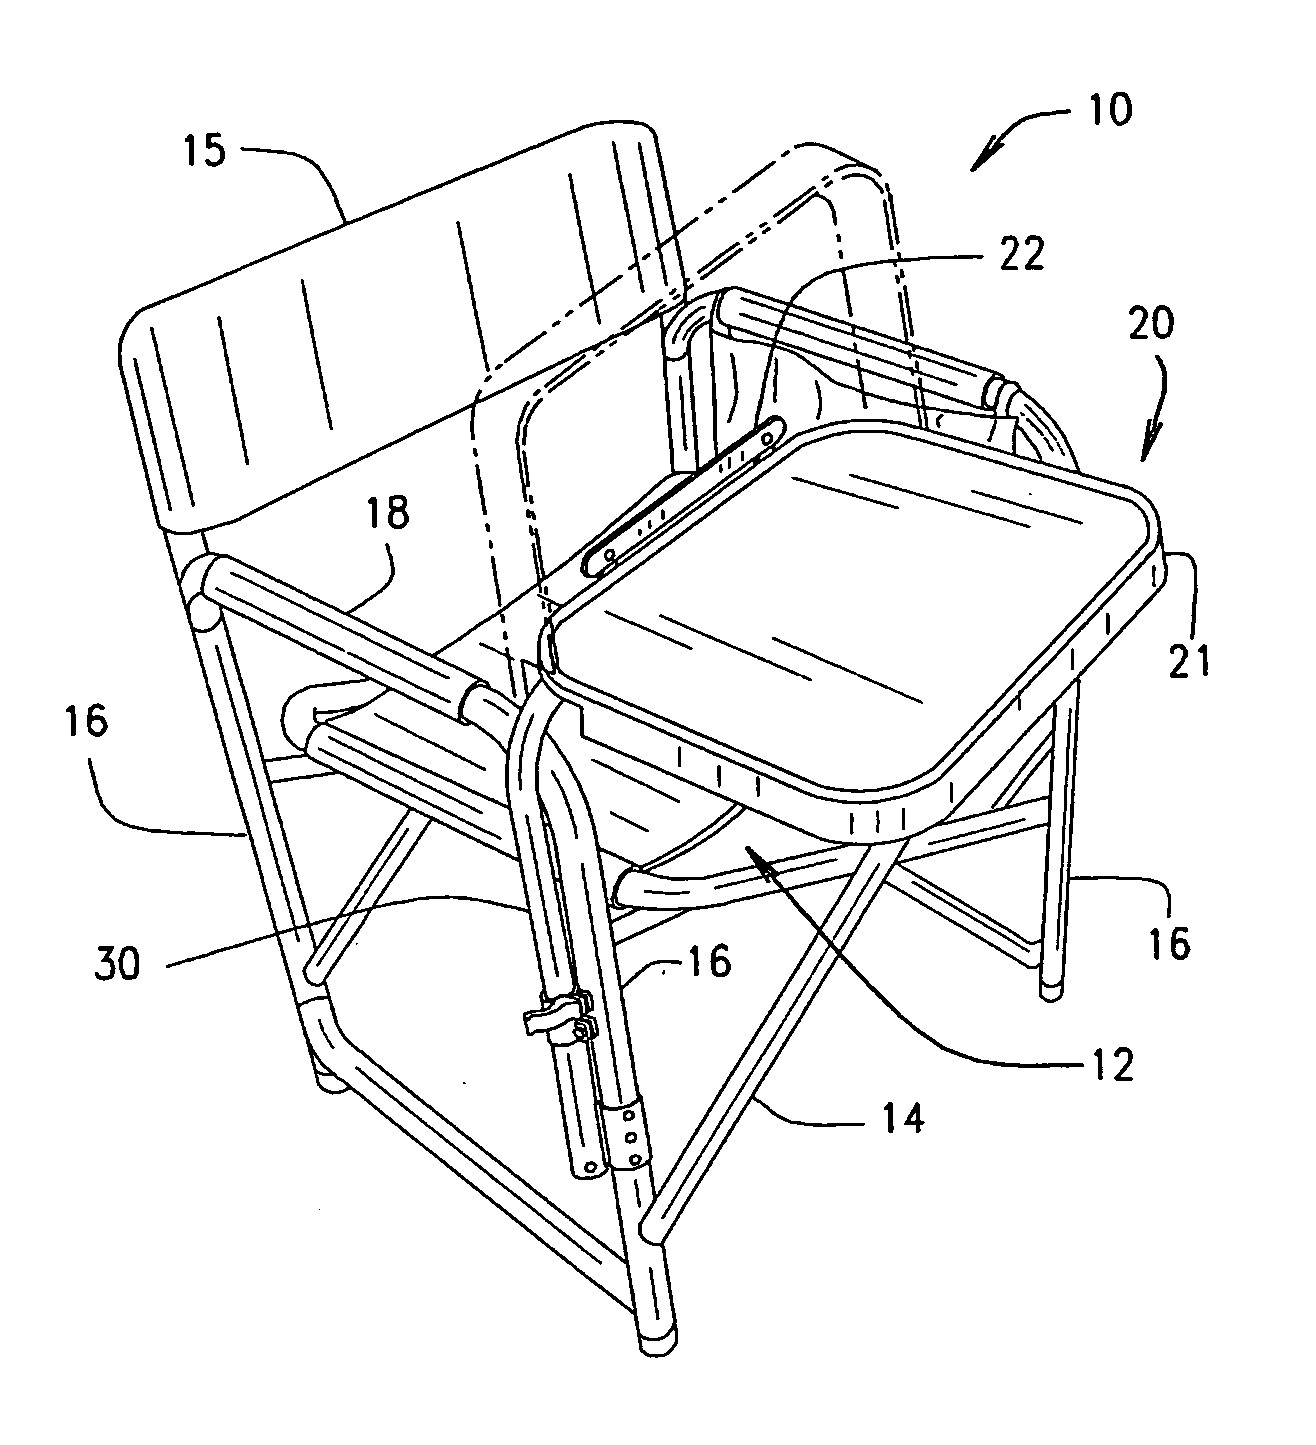 Seating device with a foldable table